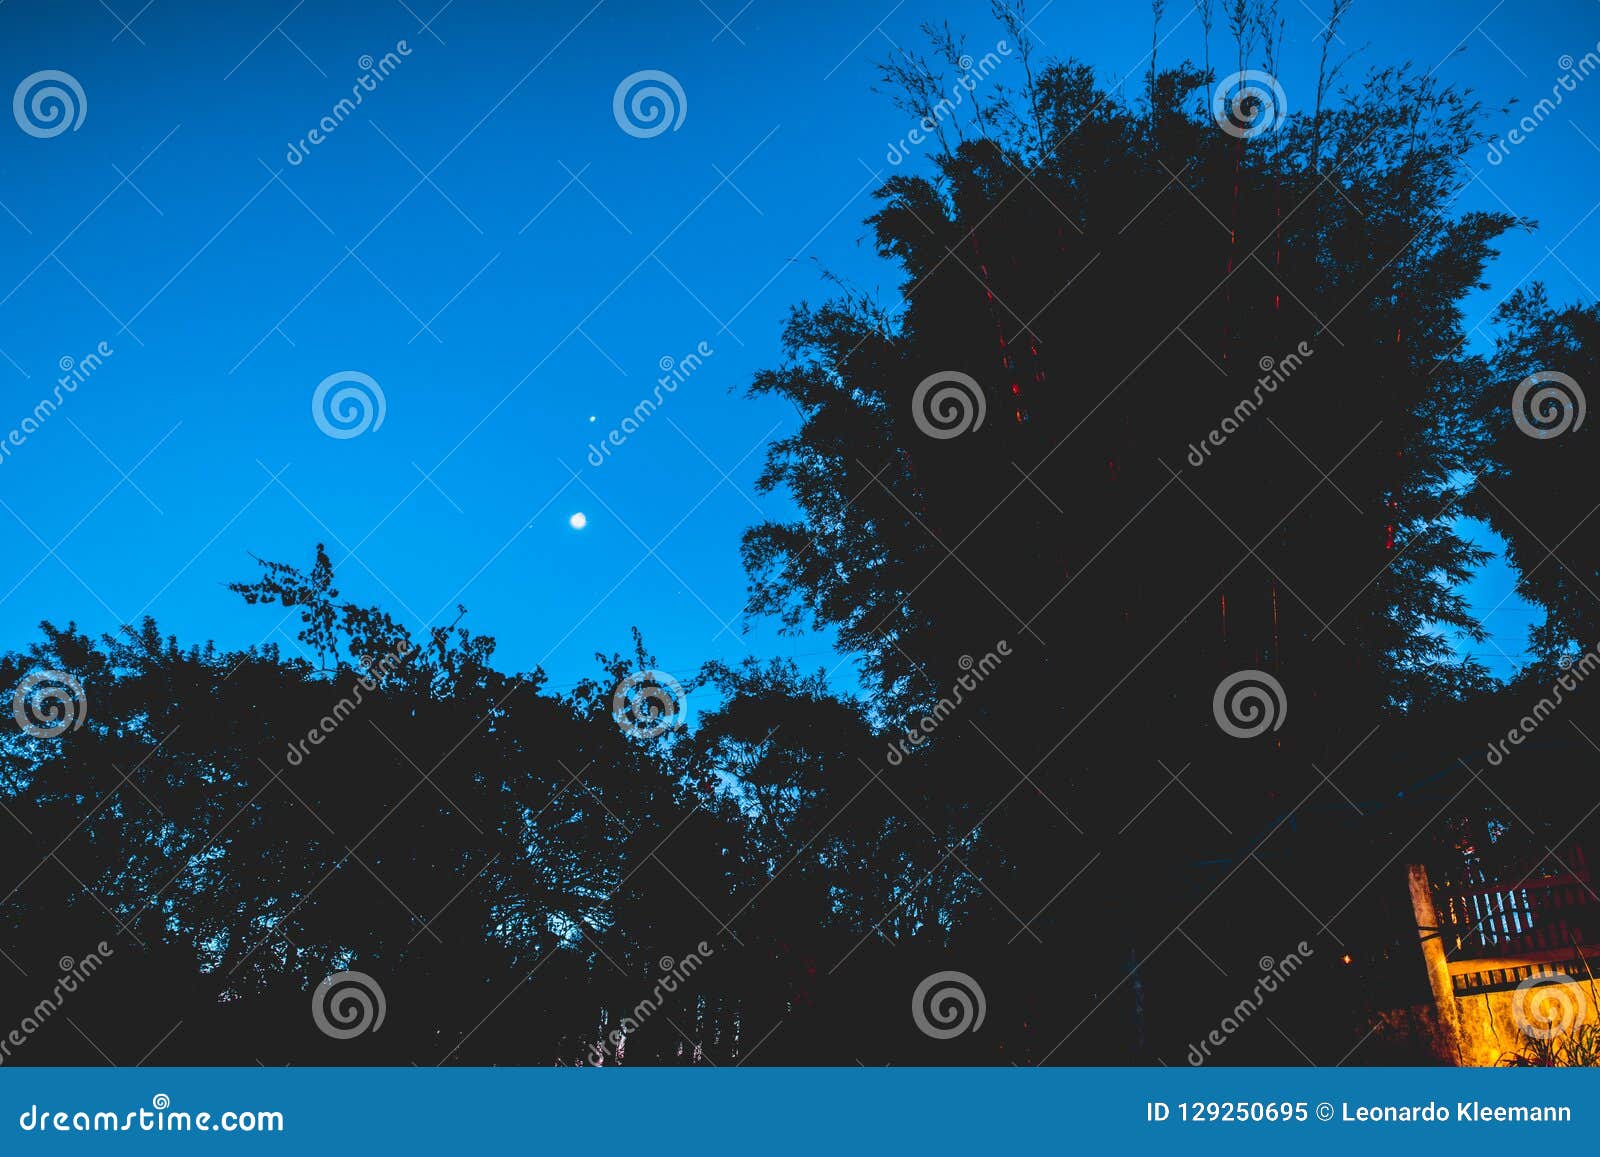 Full Moon and Tree Branches Stock Image - Image of branch, season